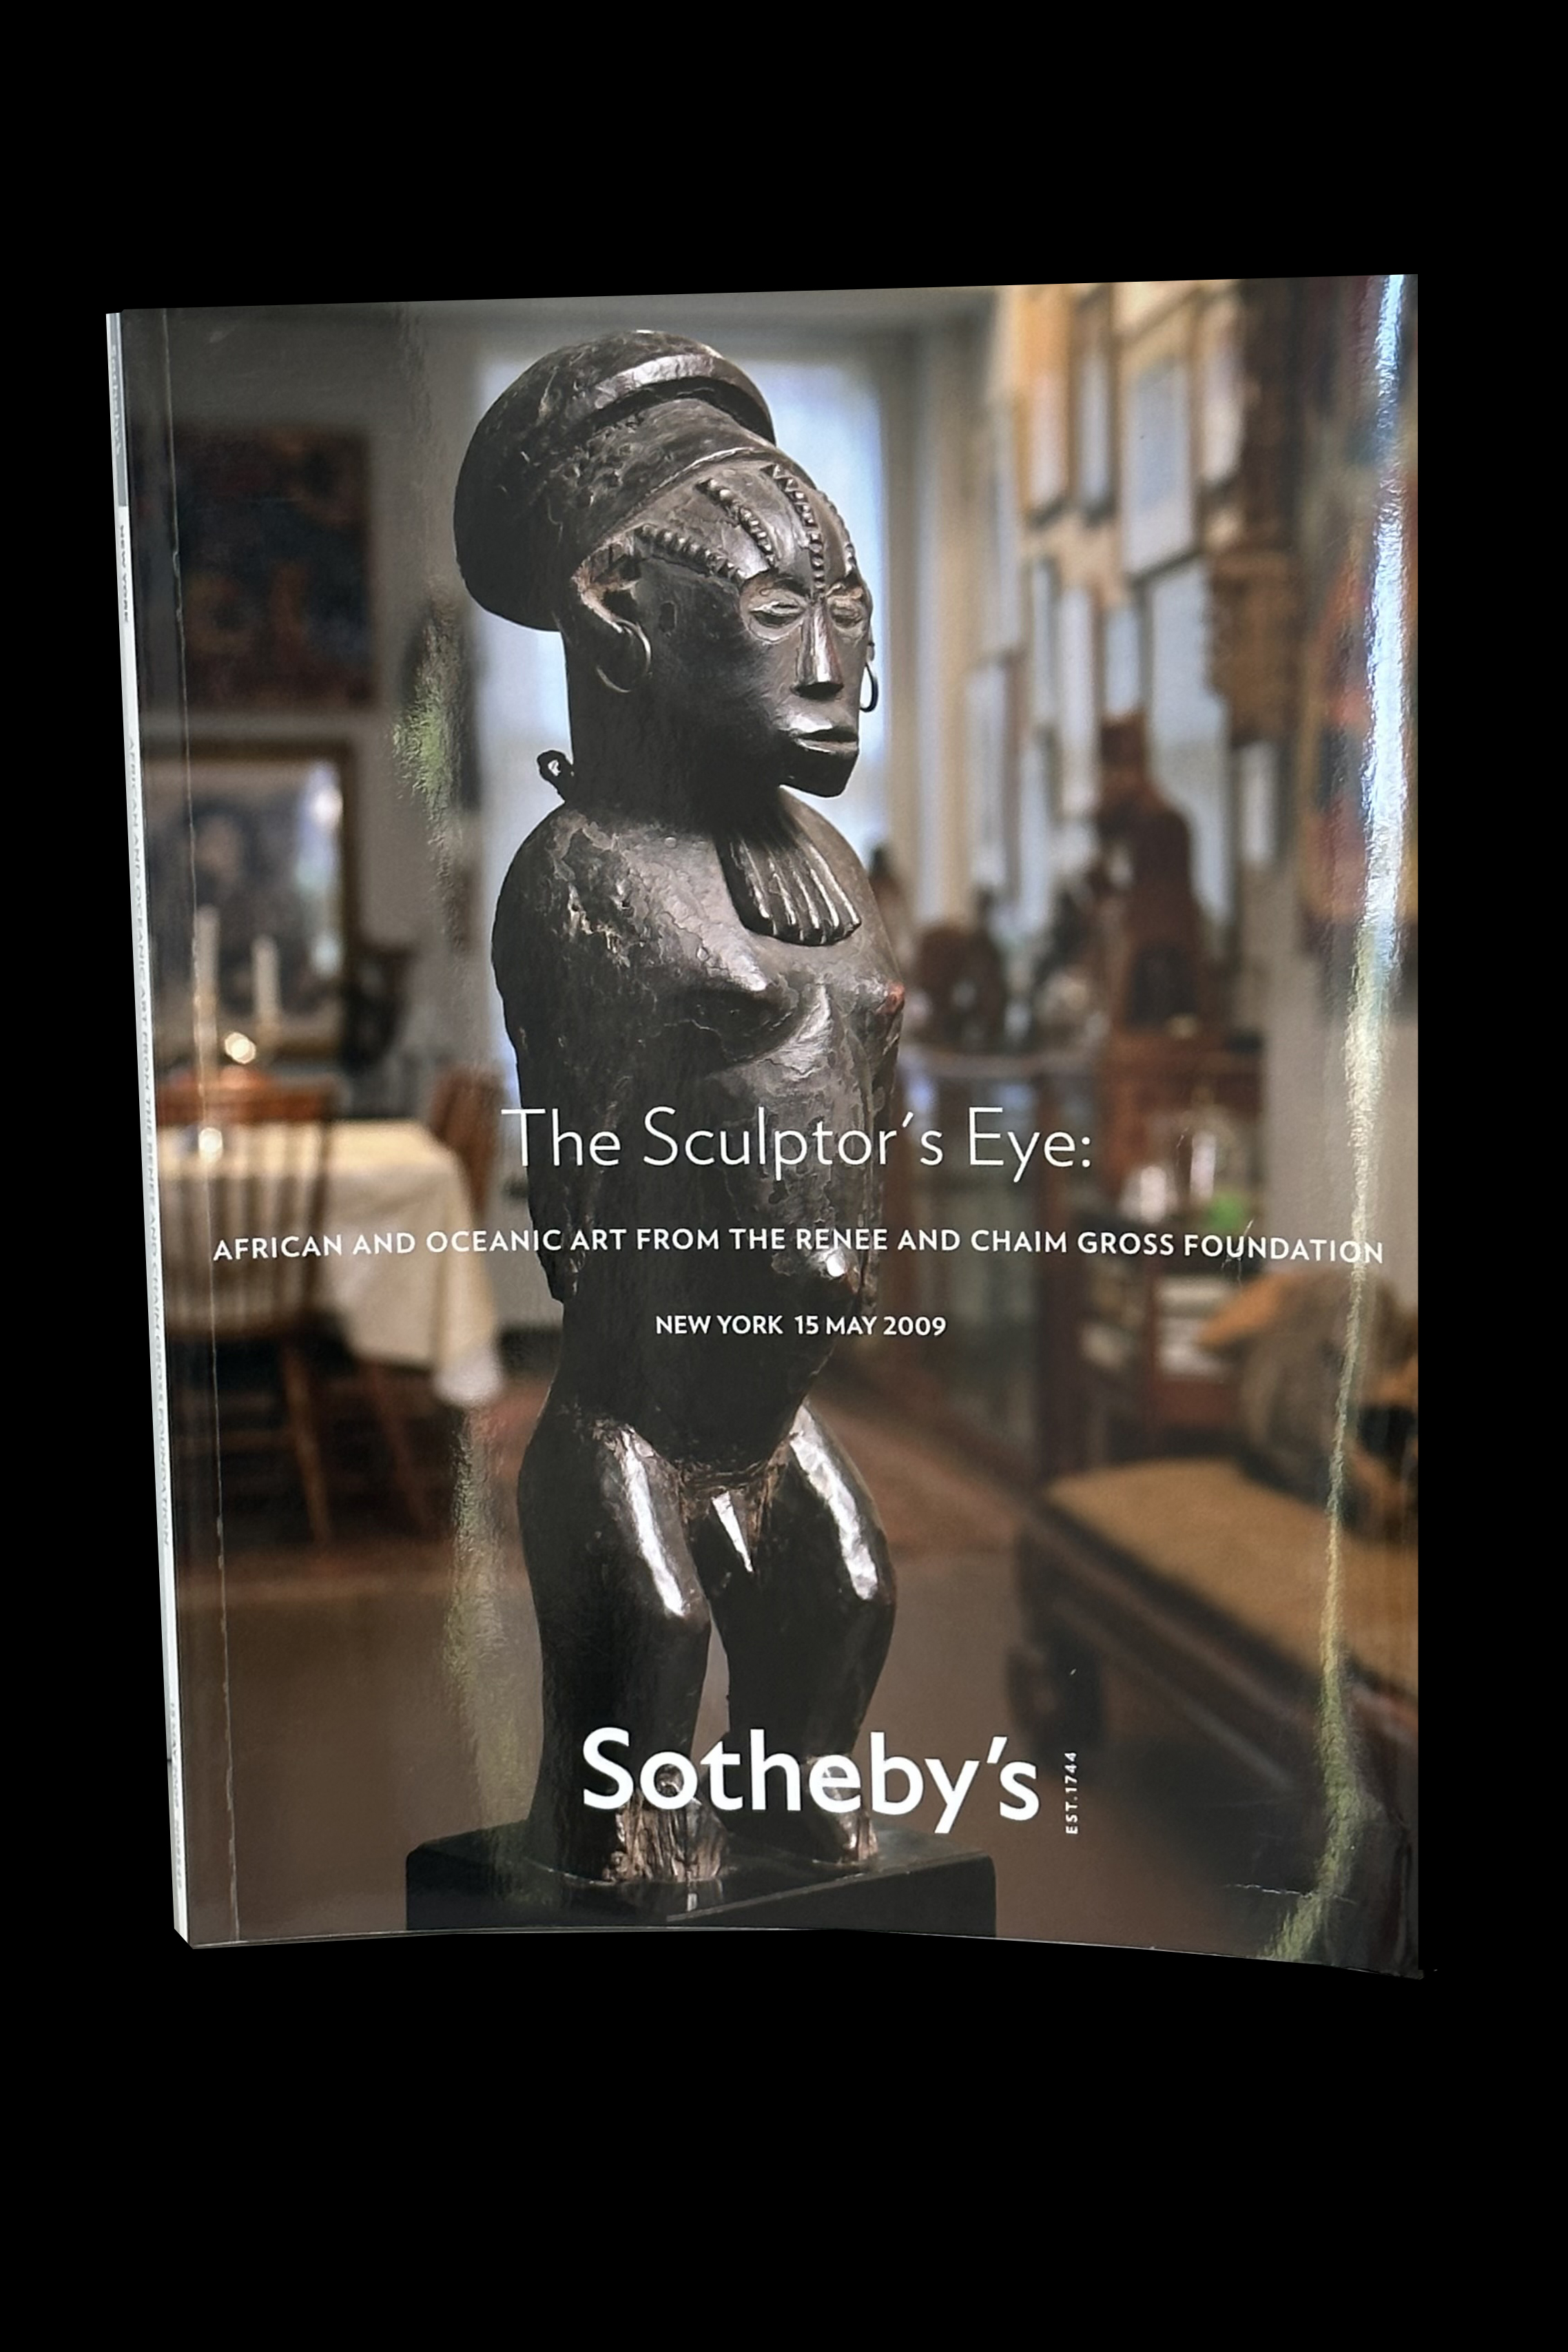 Sotheby's - The Sculptor's Eye: African and Oceanic Art from the Renee and Chaim Gross Foundation - New York, May 2009